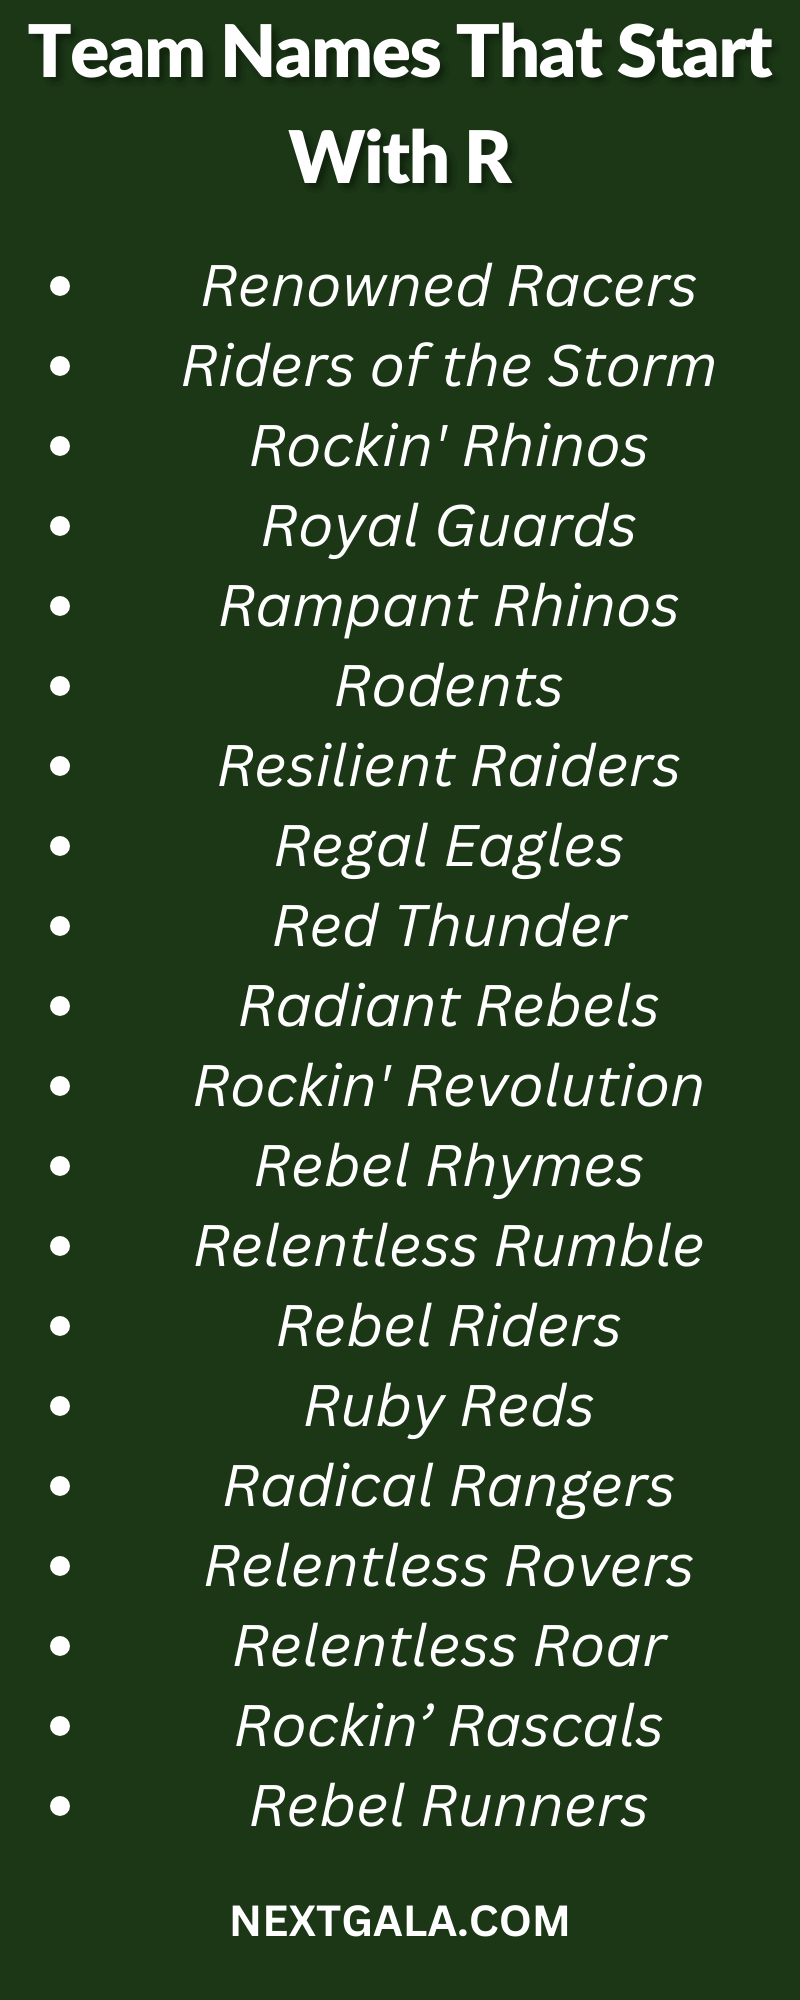 Team Names That Start With R